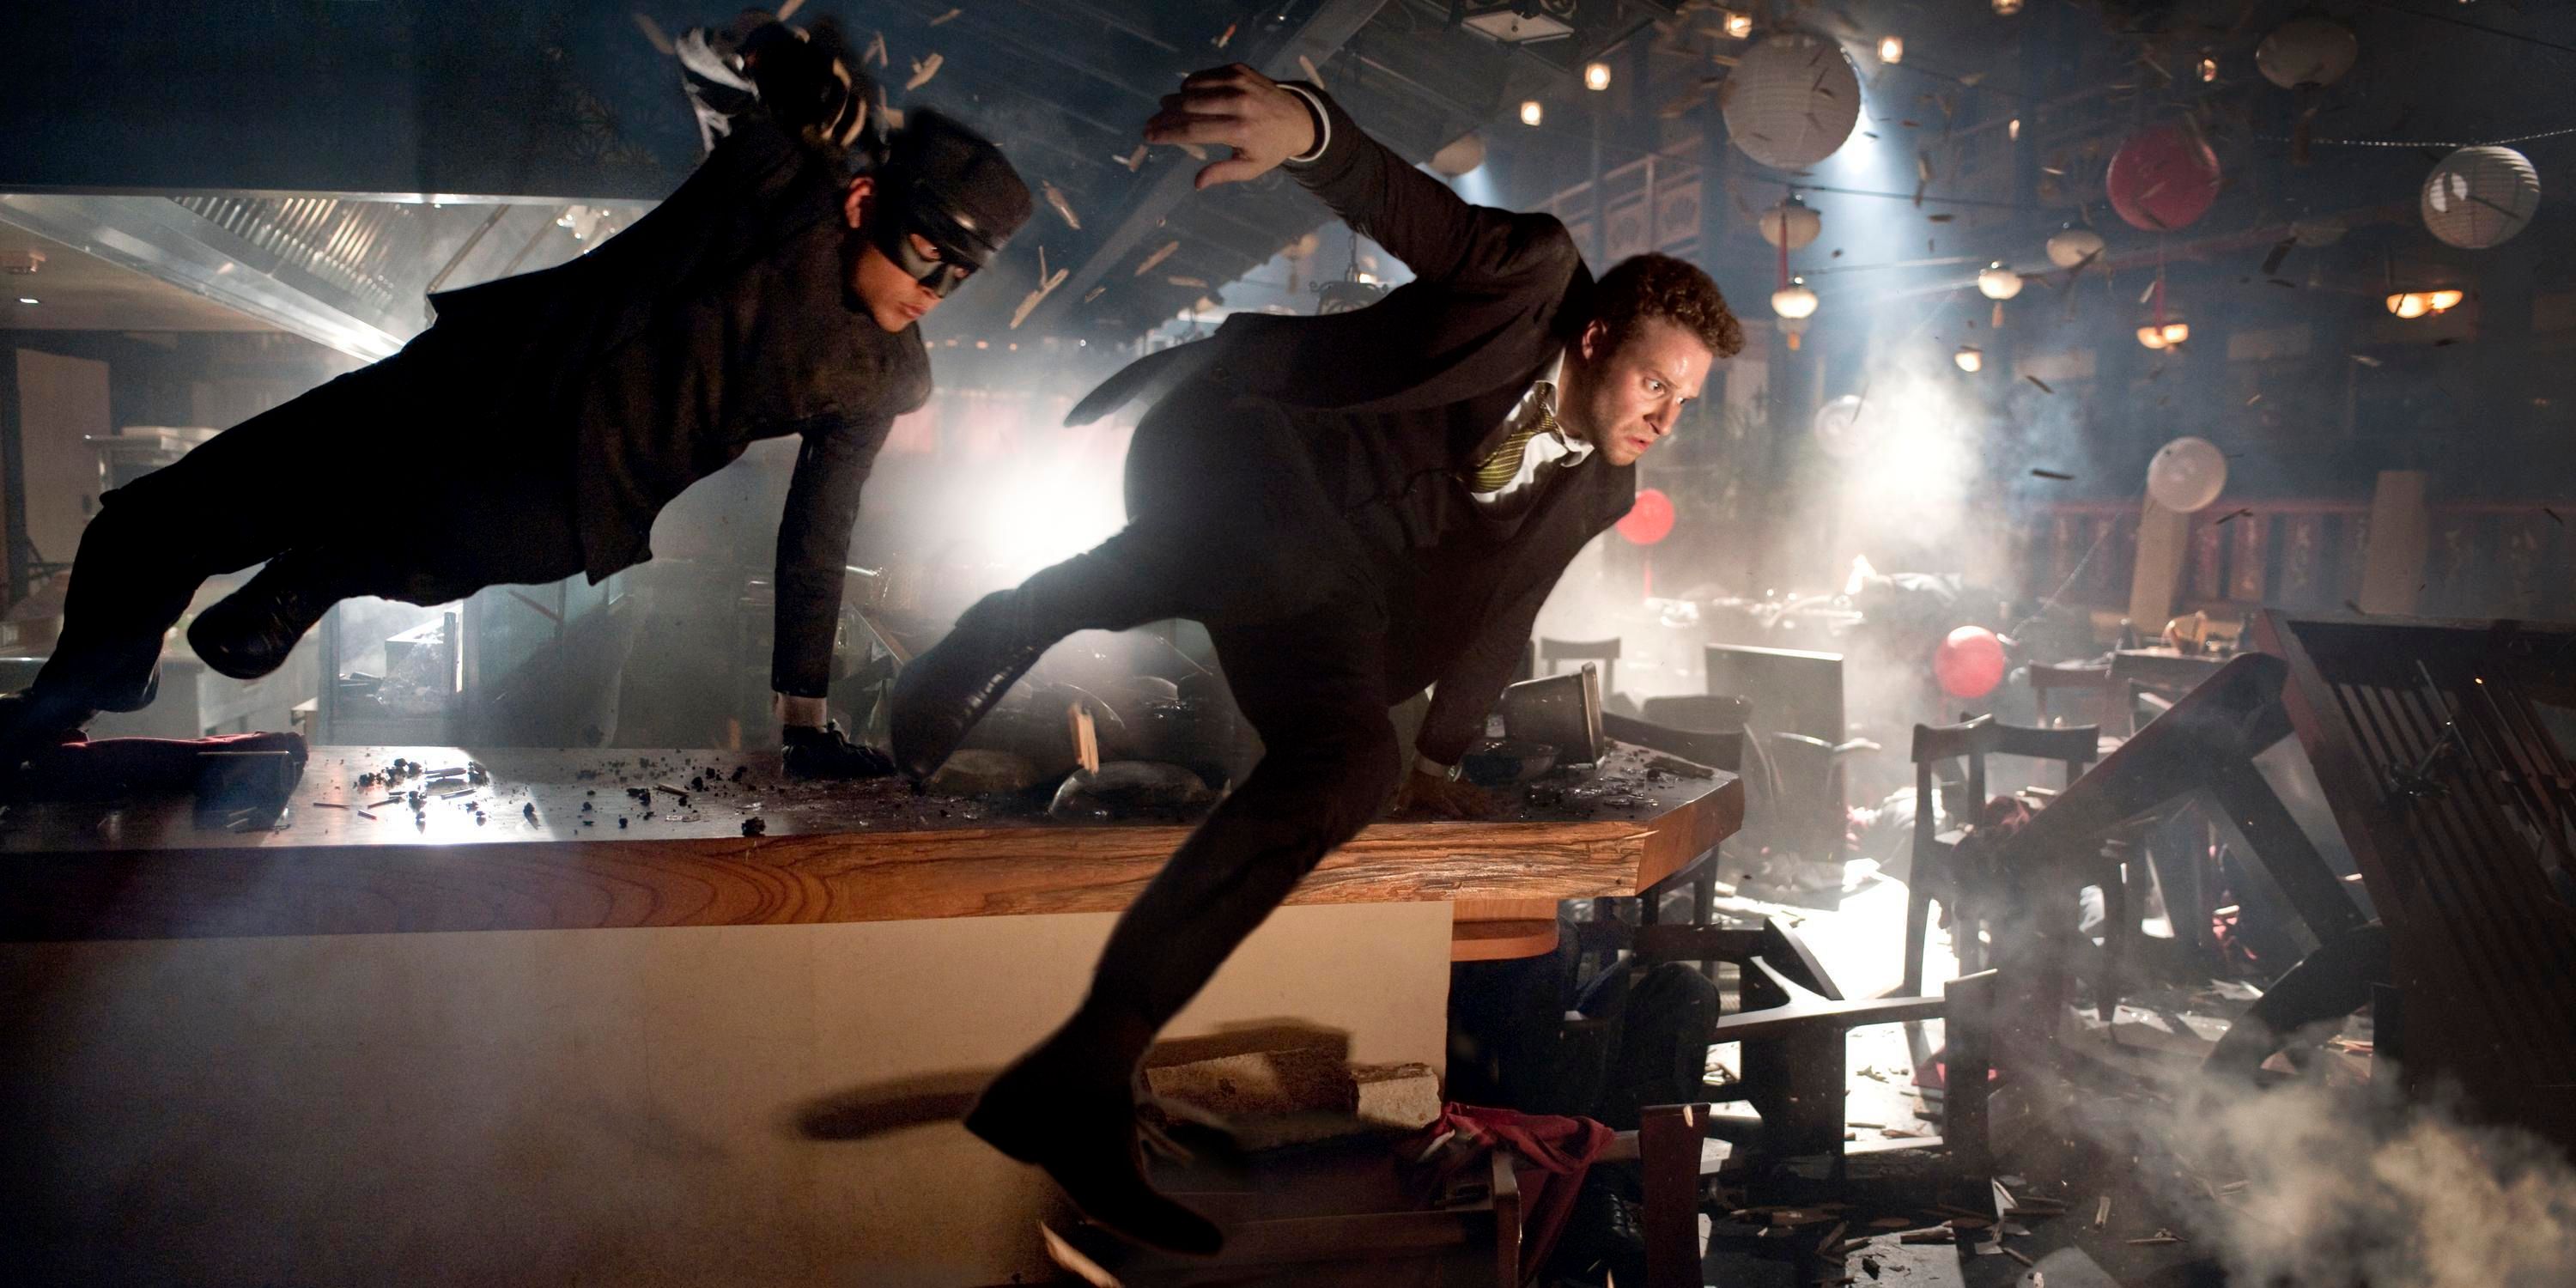 Jay Chou and Seth Rogen in The Green Hornet